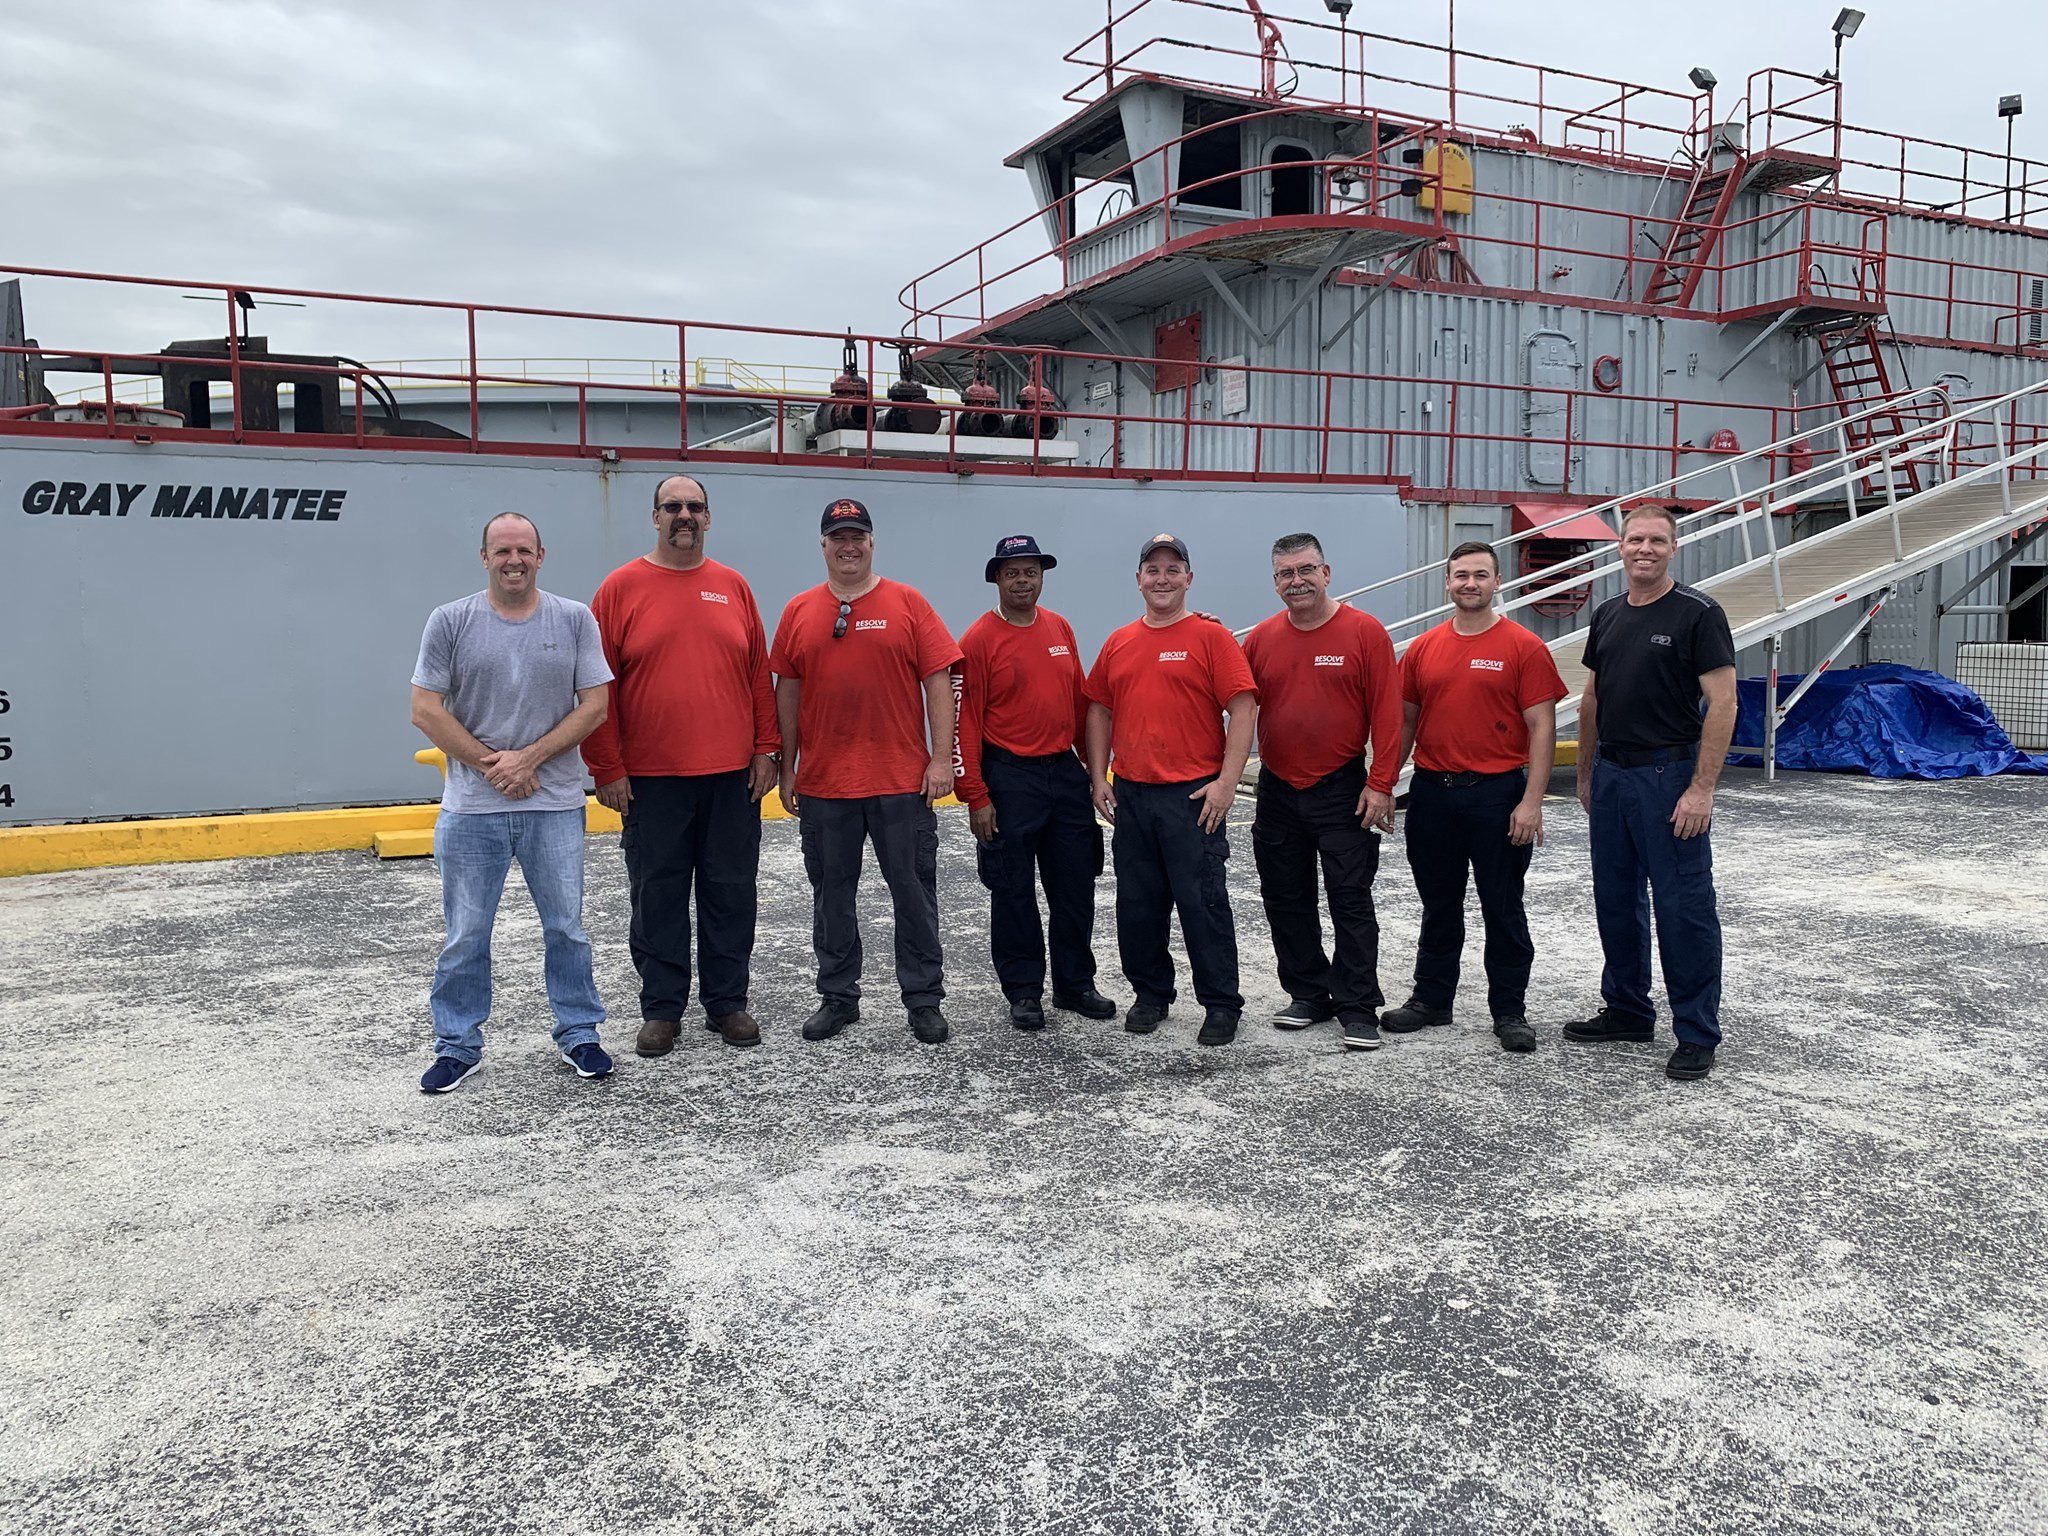 Fire Ranger TM and Resolve Maritime Academy Announce Partnership Aligning Live-Action Training with State-of-the-Art Fire Safety Equipment and Services